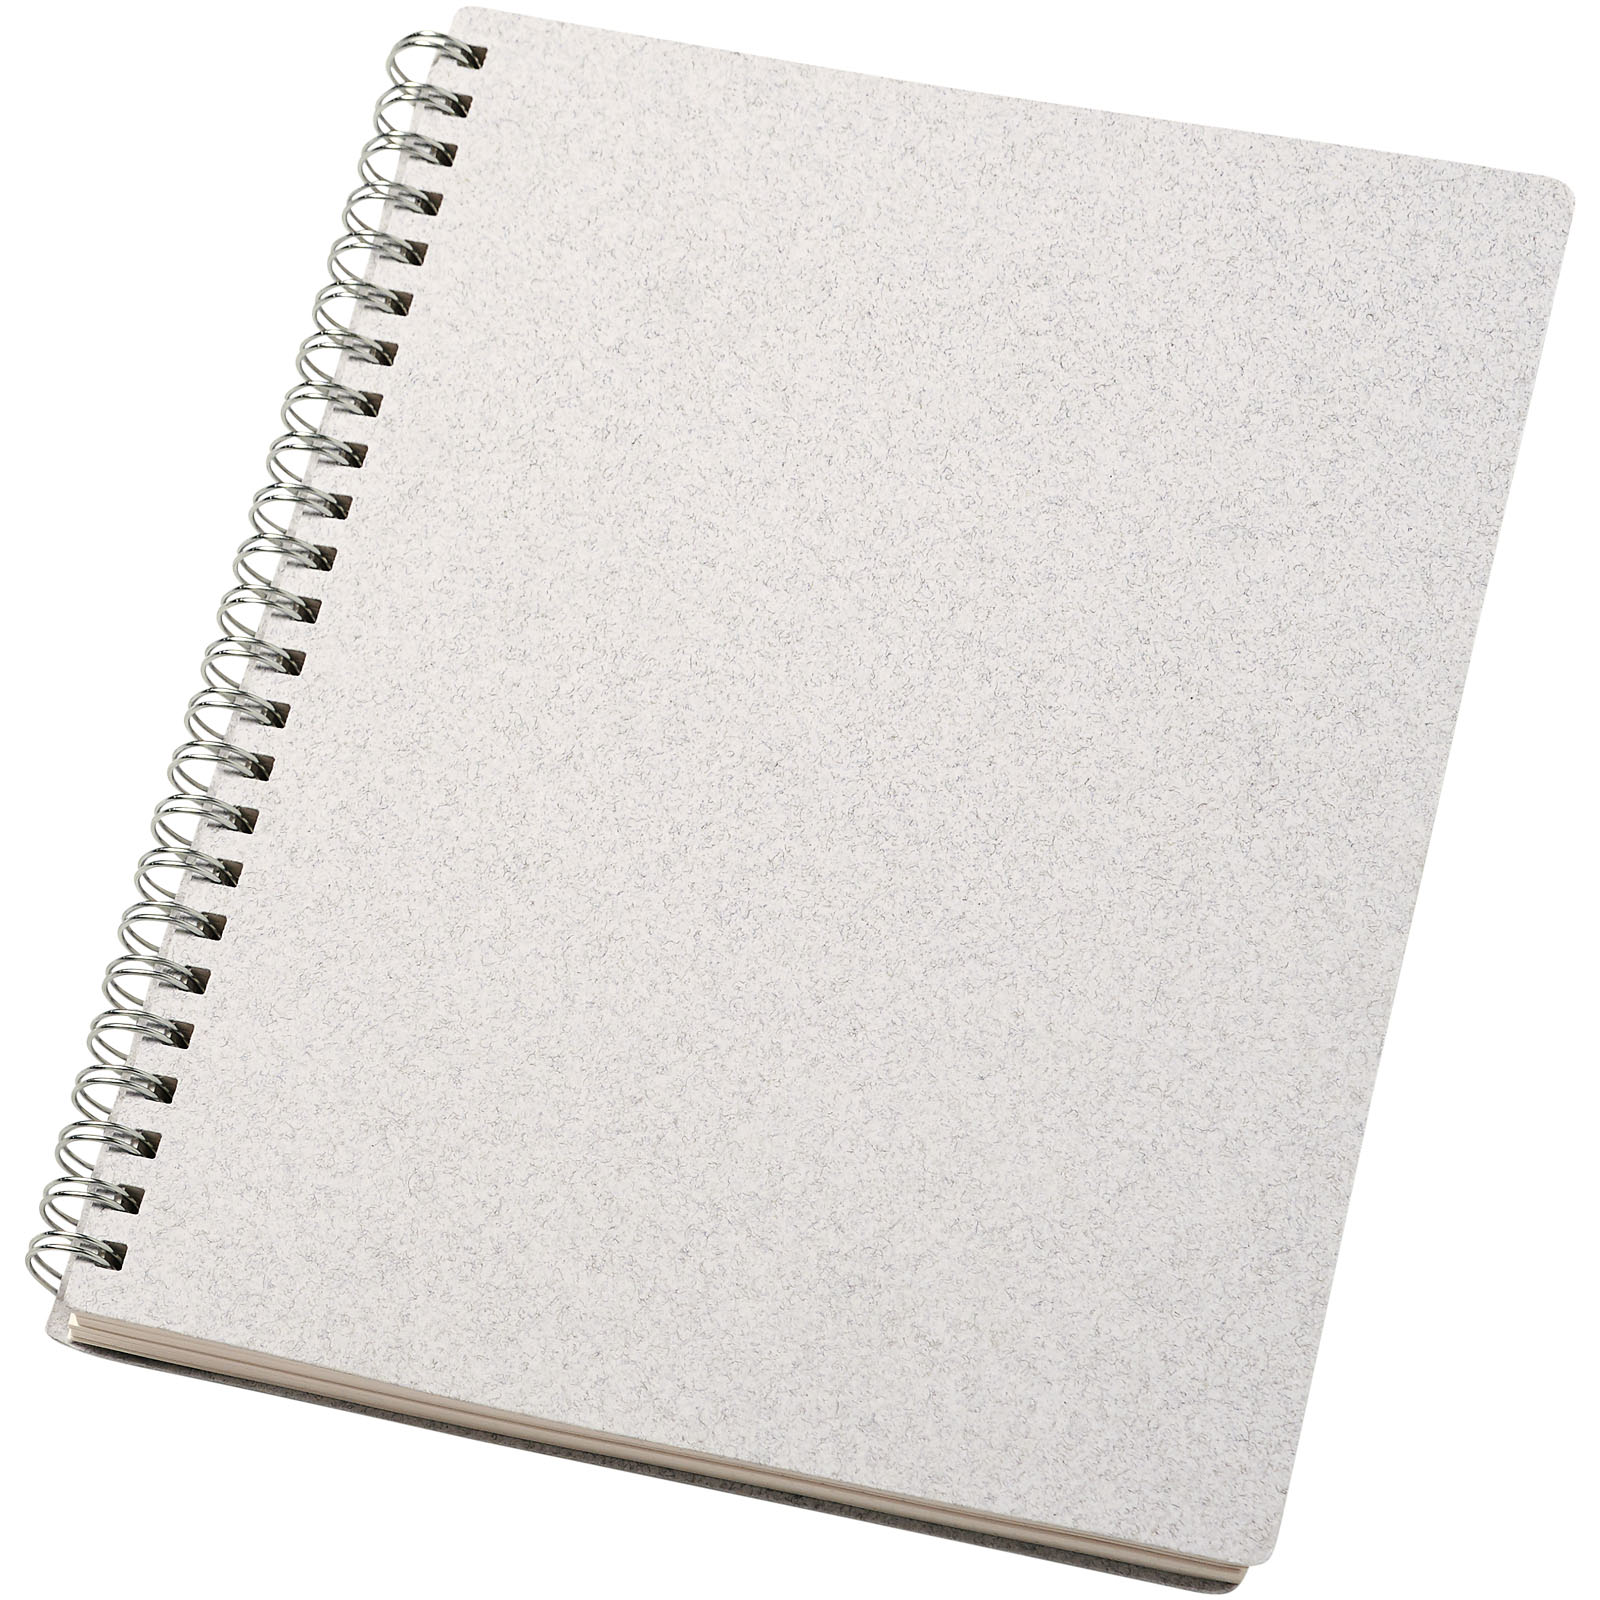 Advertising Notebooks - Bianco A5 size wire-o notebook - 0